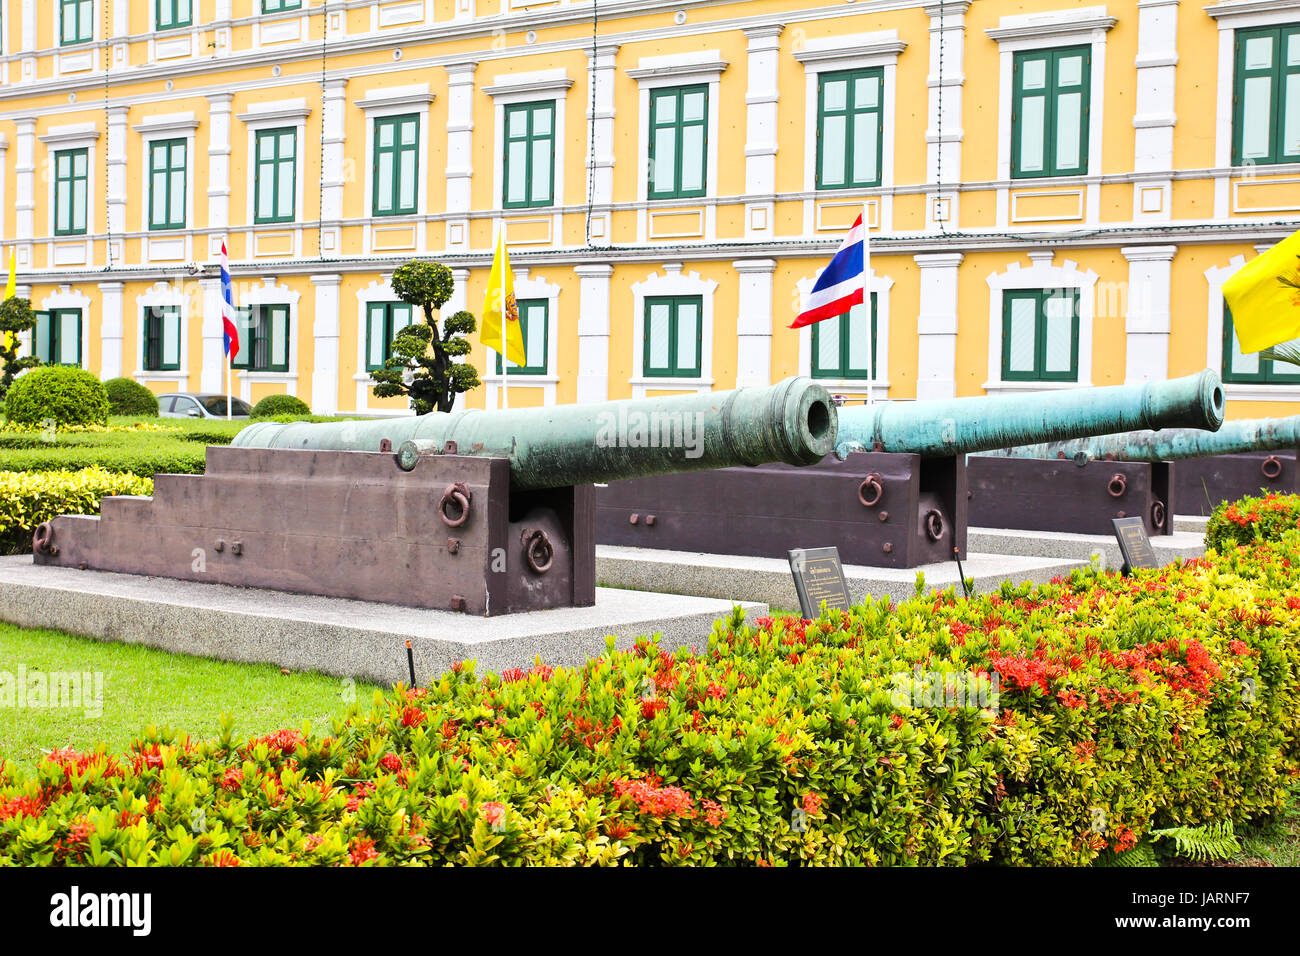 Ancient biggest cannon and Lion statue from Thai government museum, every body can take a photo and see. Stock Photo